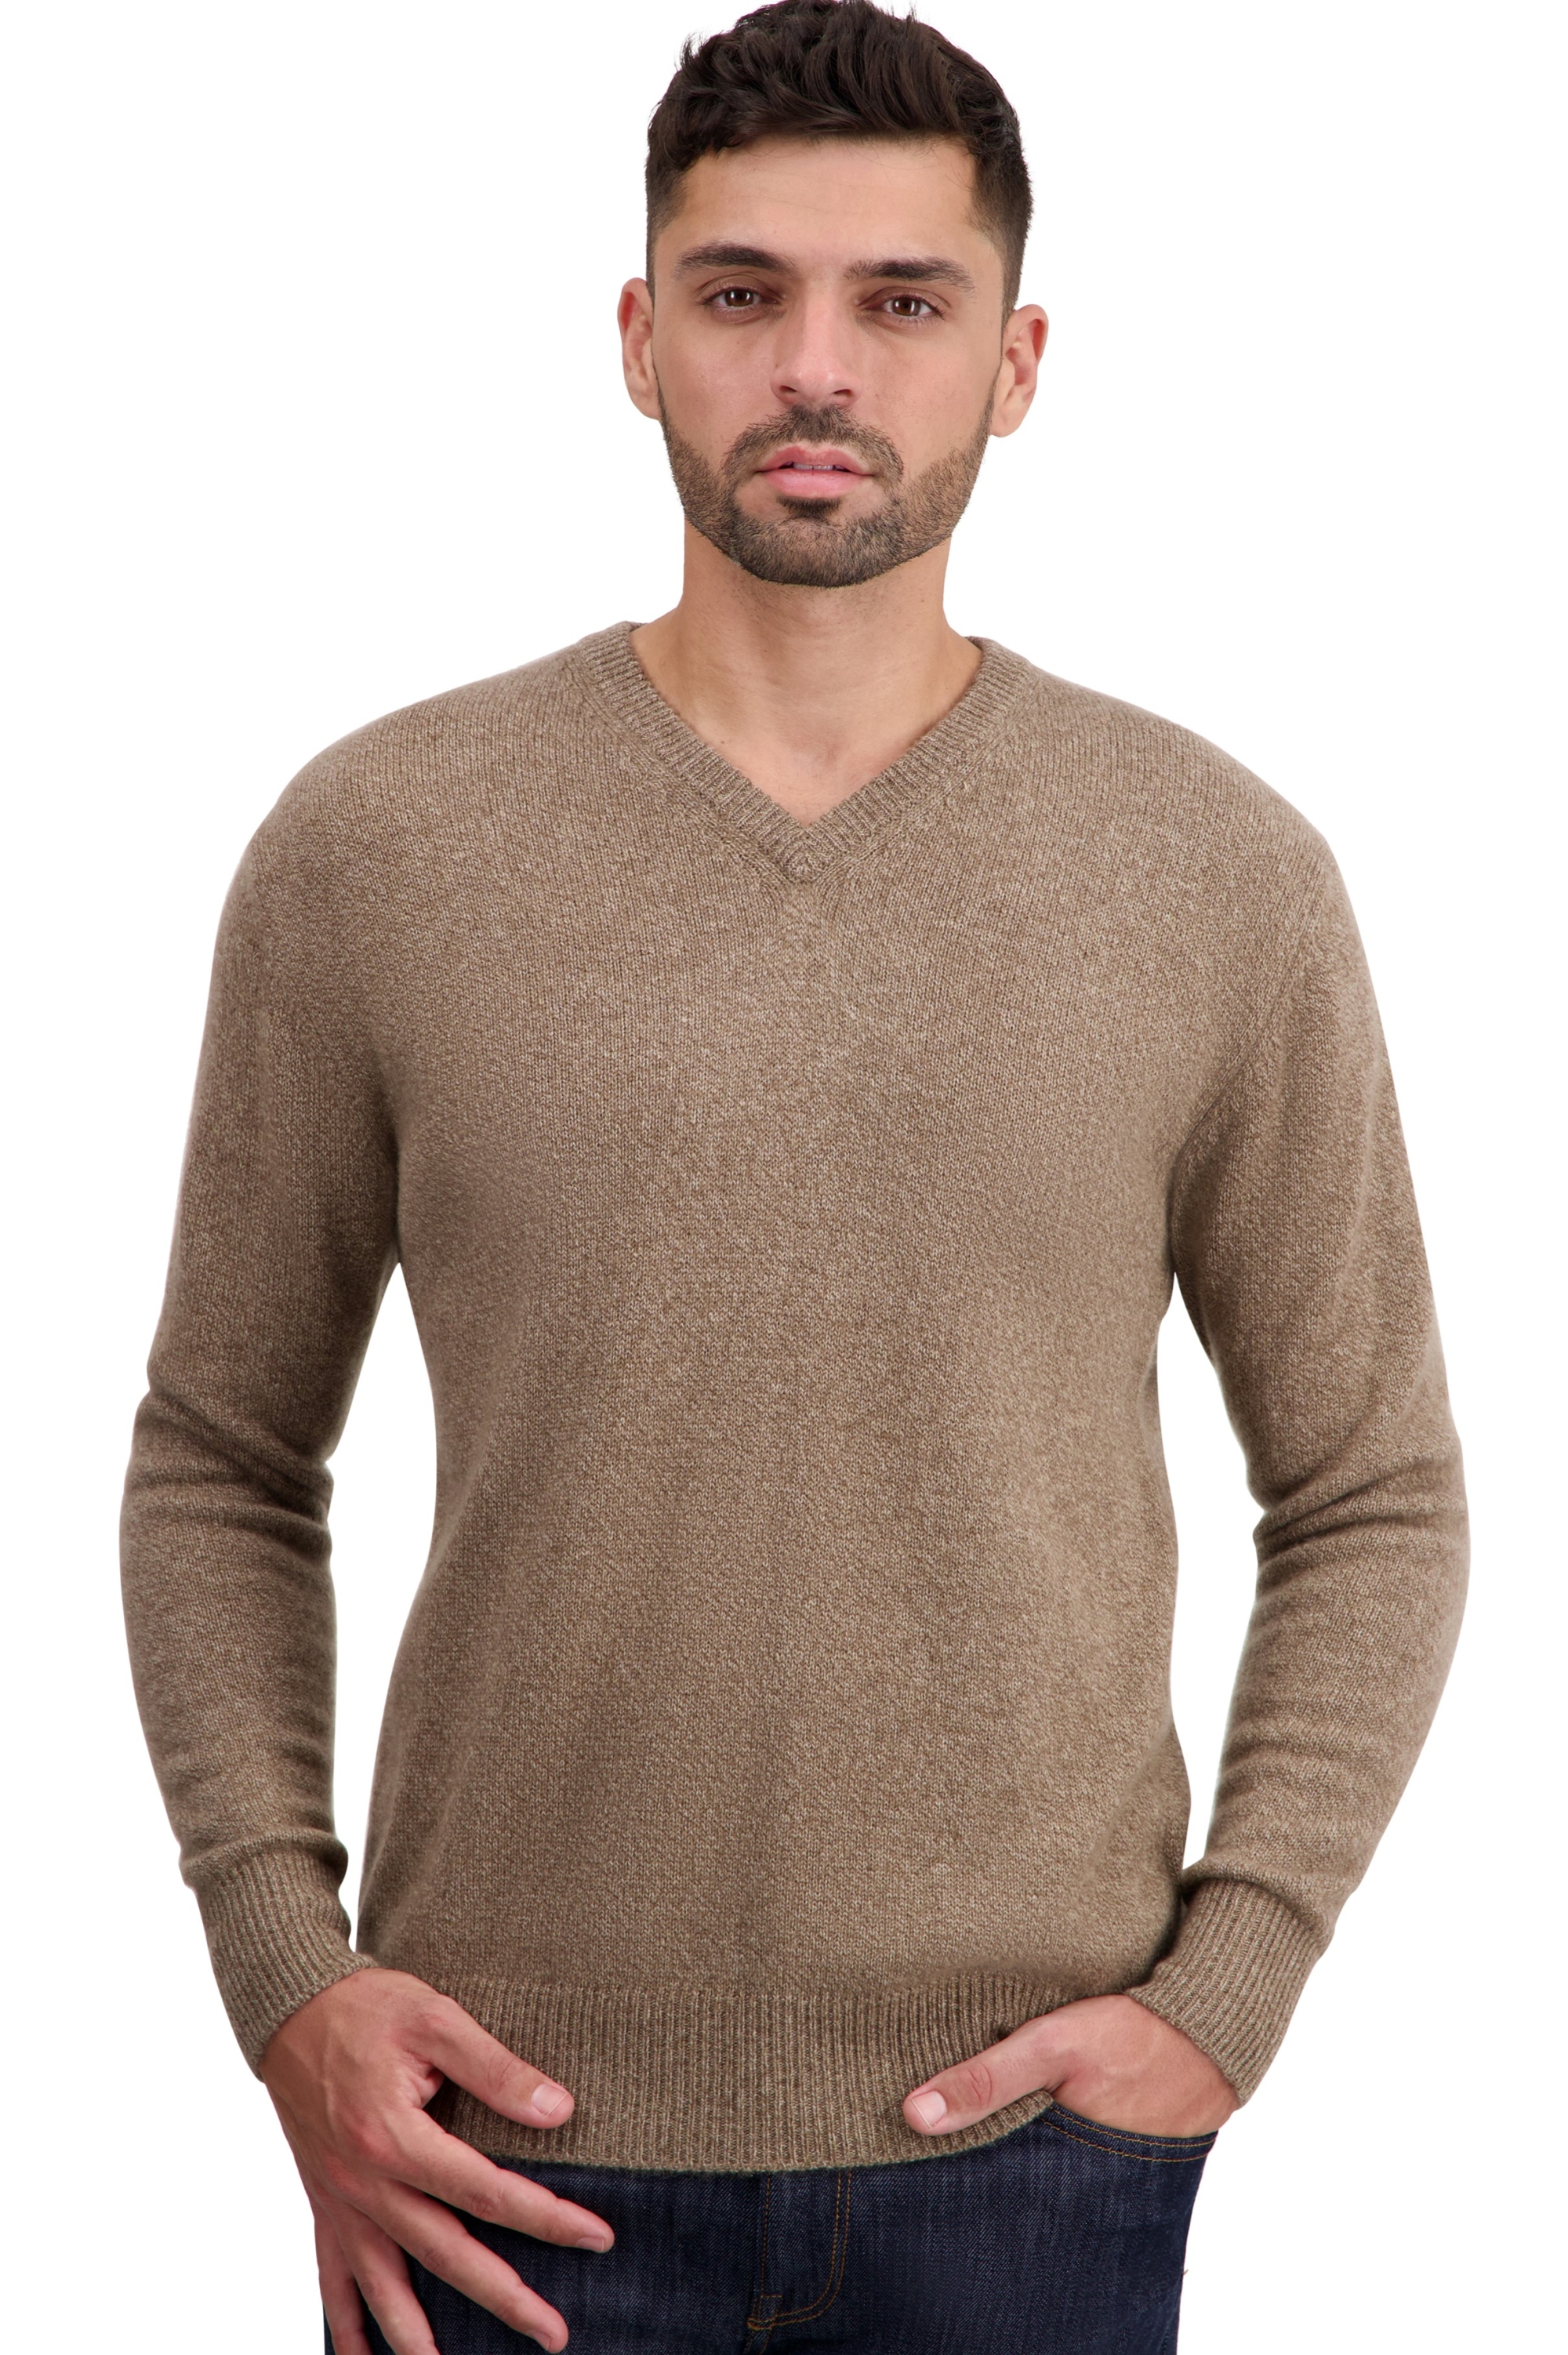 Cachemire pull homme col v tour first tan marl 3xl